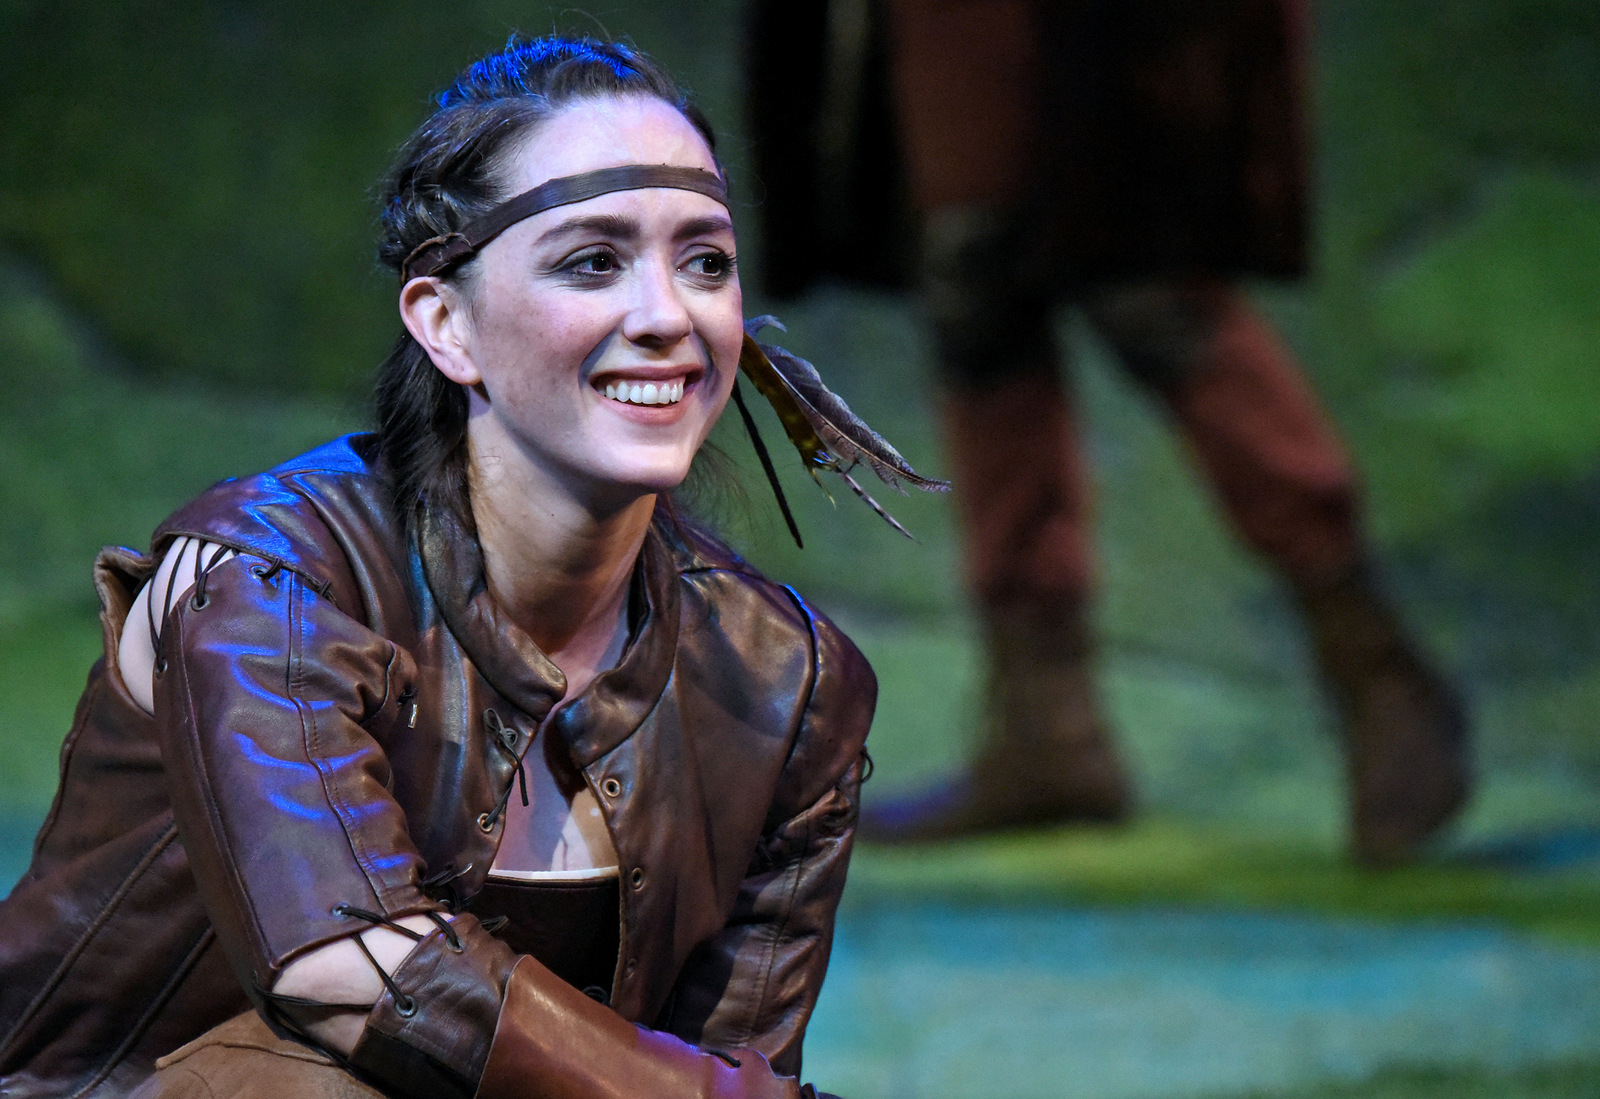 Vesturport and The Wallis’ The Heart of Robin Hood. Pictured (l-r): Christina Bennett Lind. Photo credit: Kevin Parry for The Wallis.